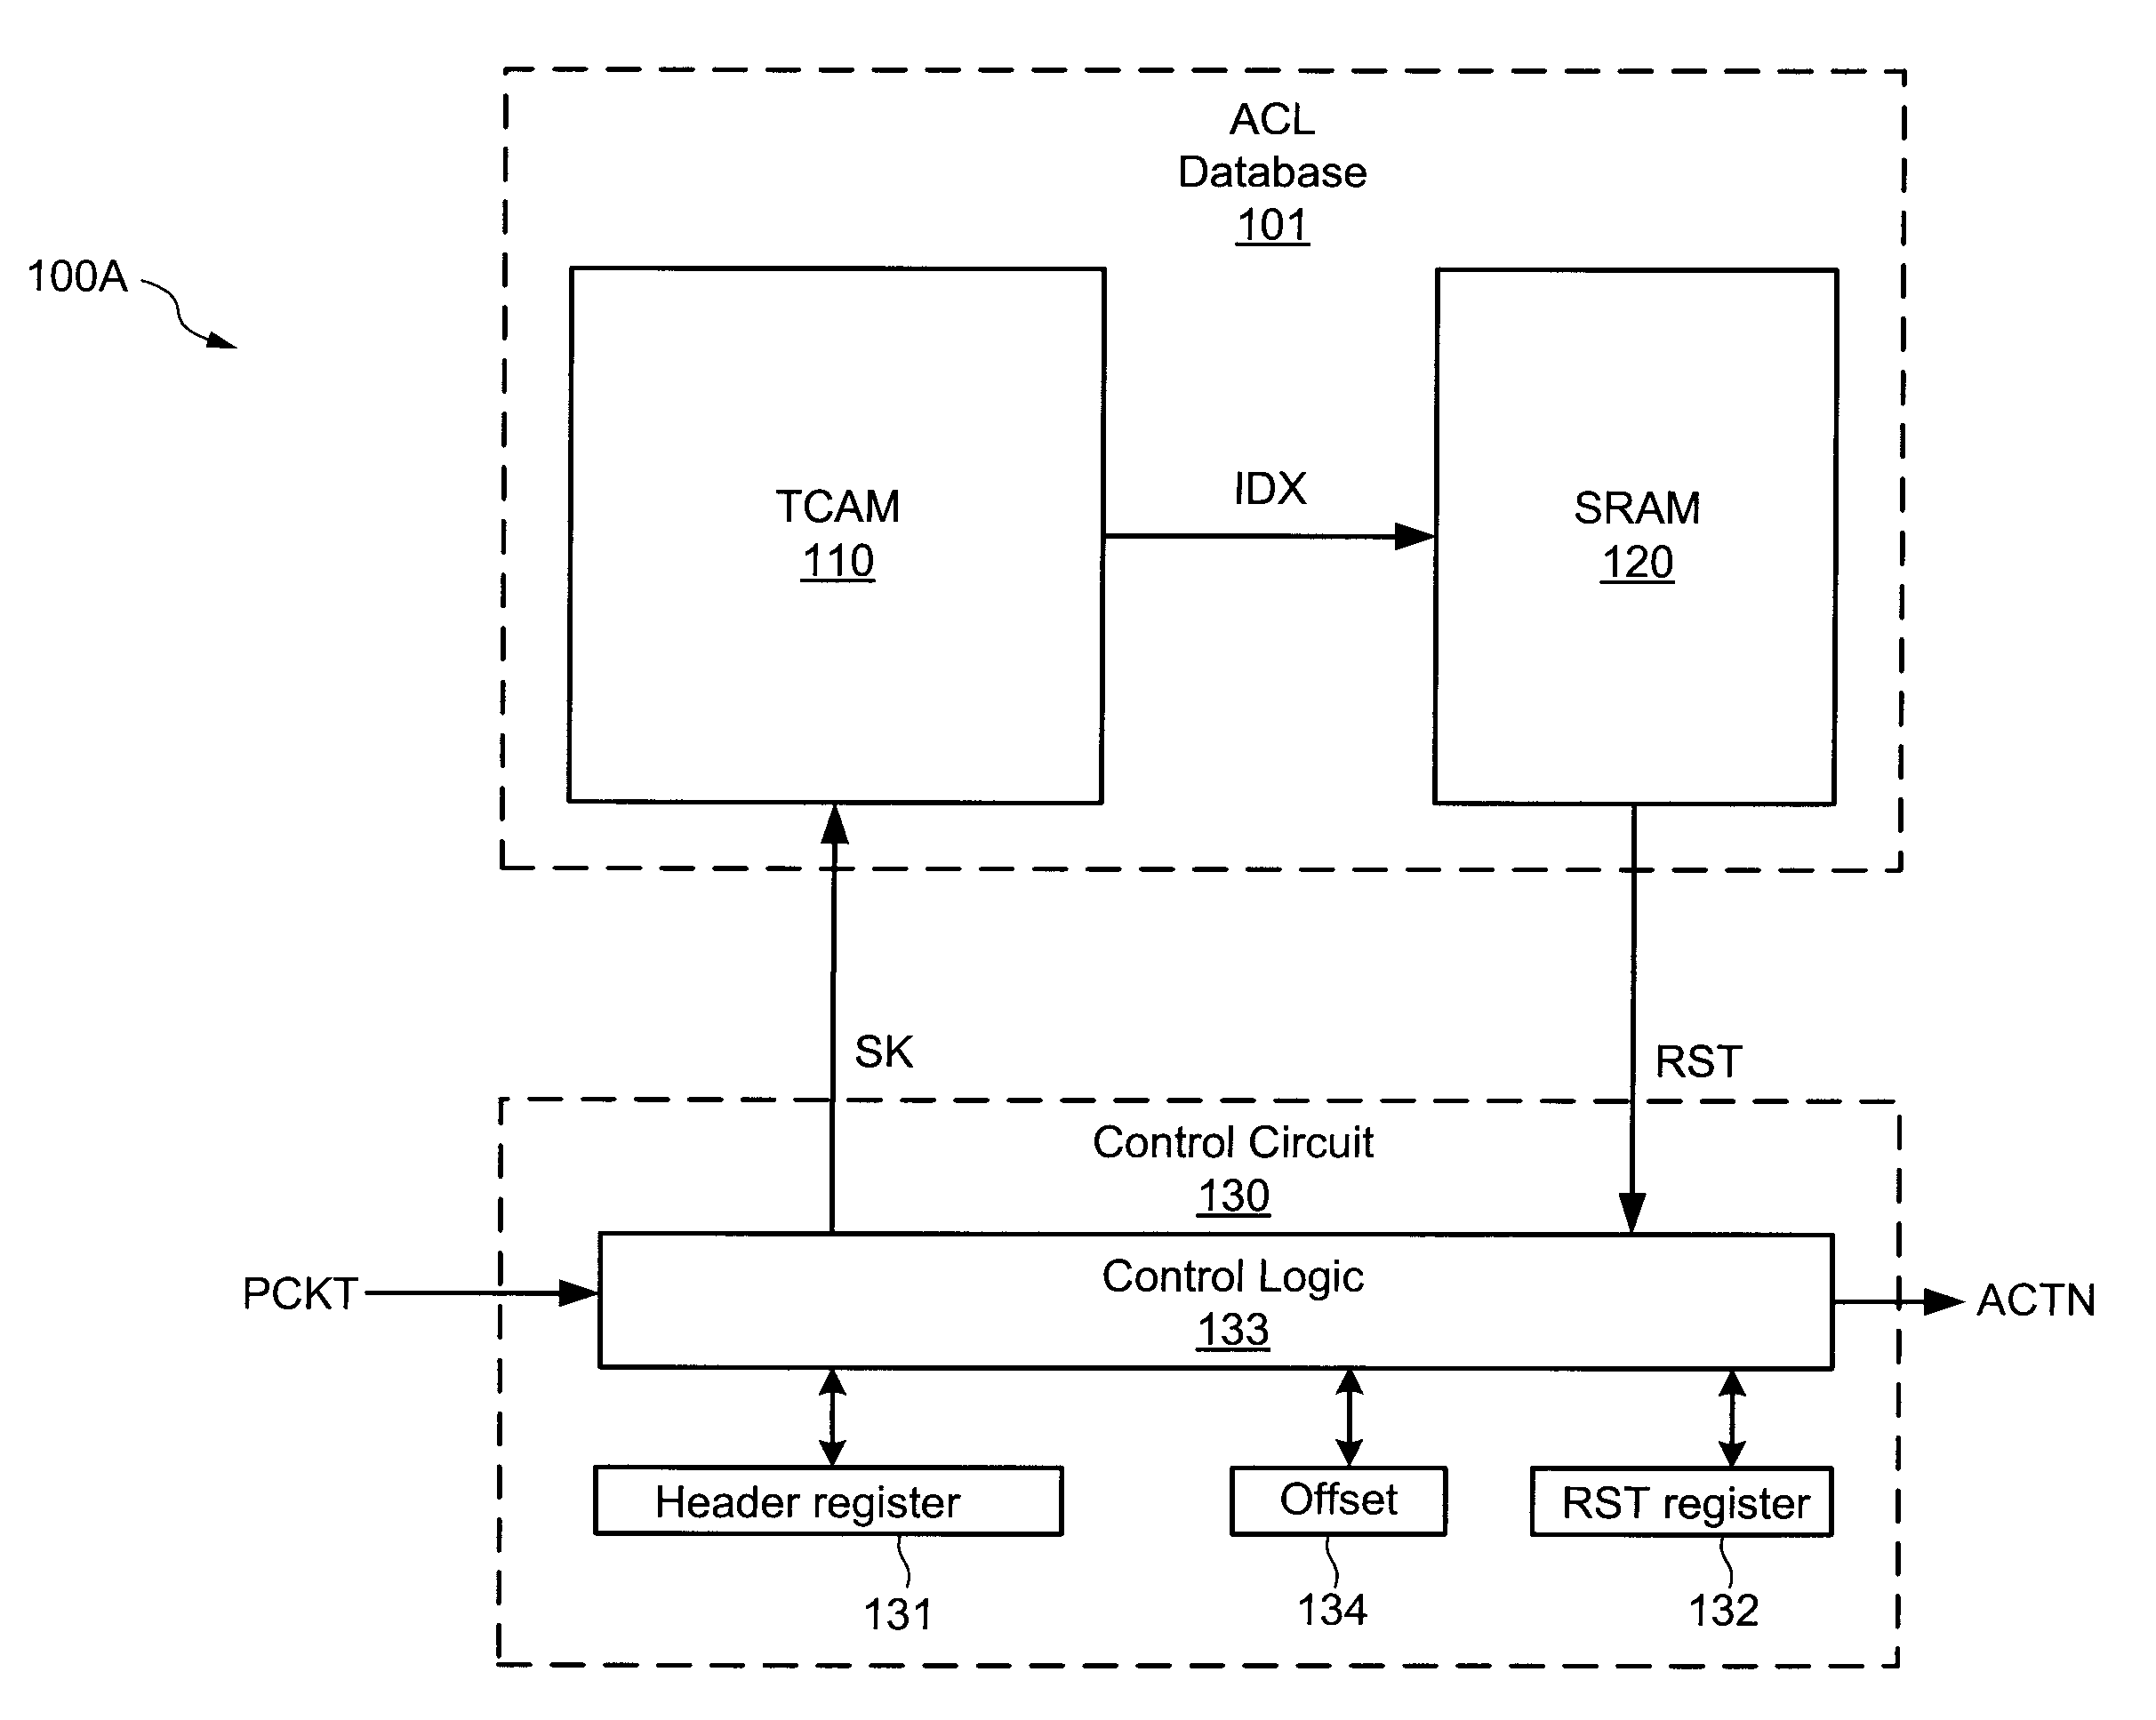 Method for combining and storing access control lists